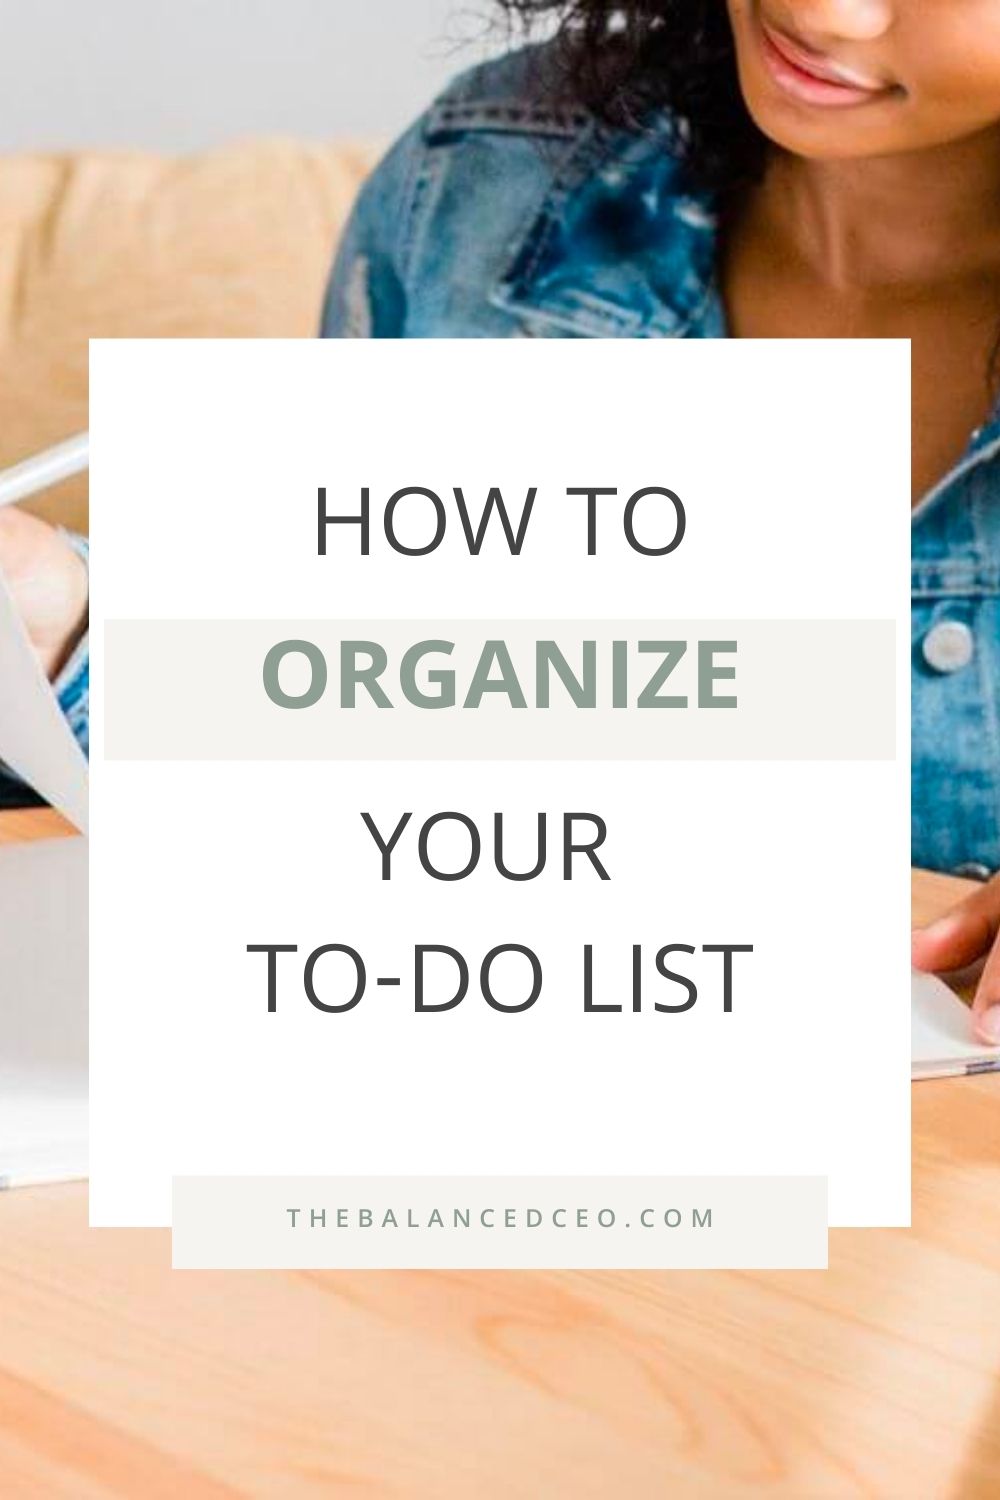 How to Organize Your To-Do List - The Balanced CEO